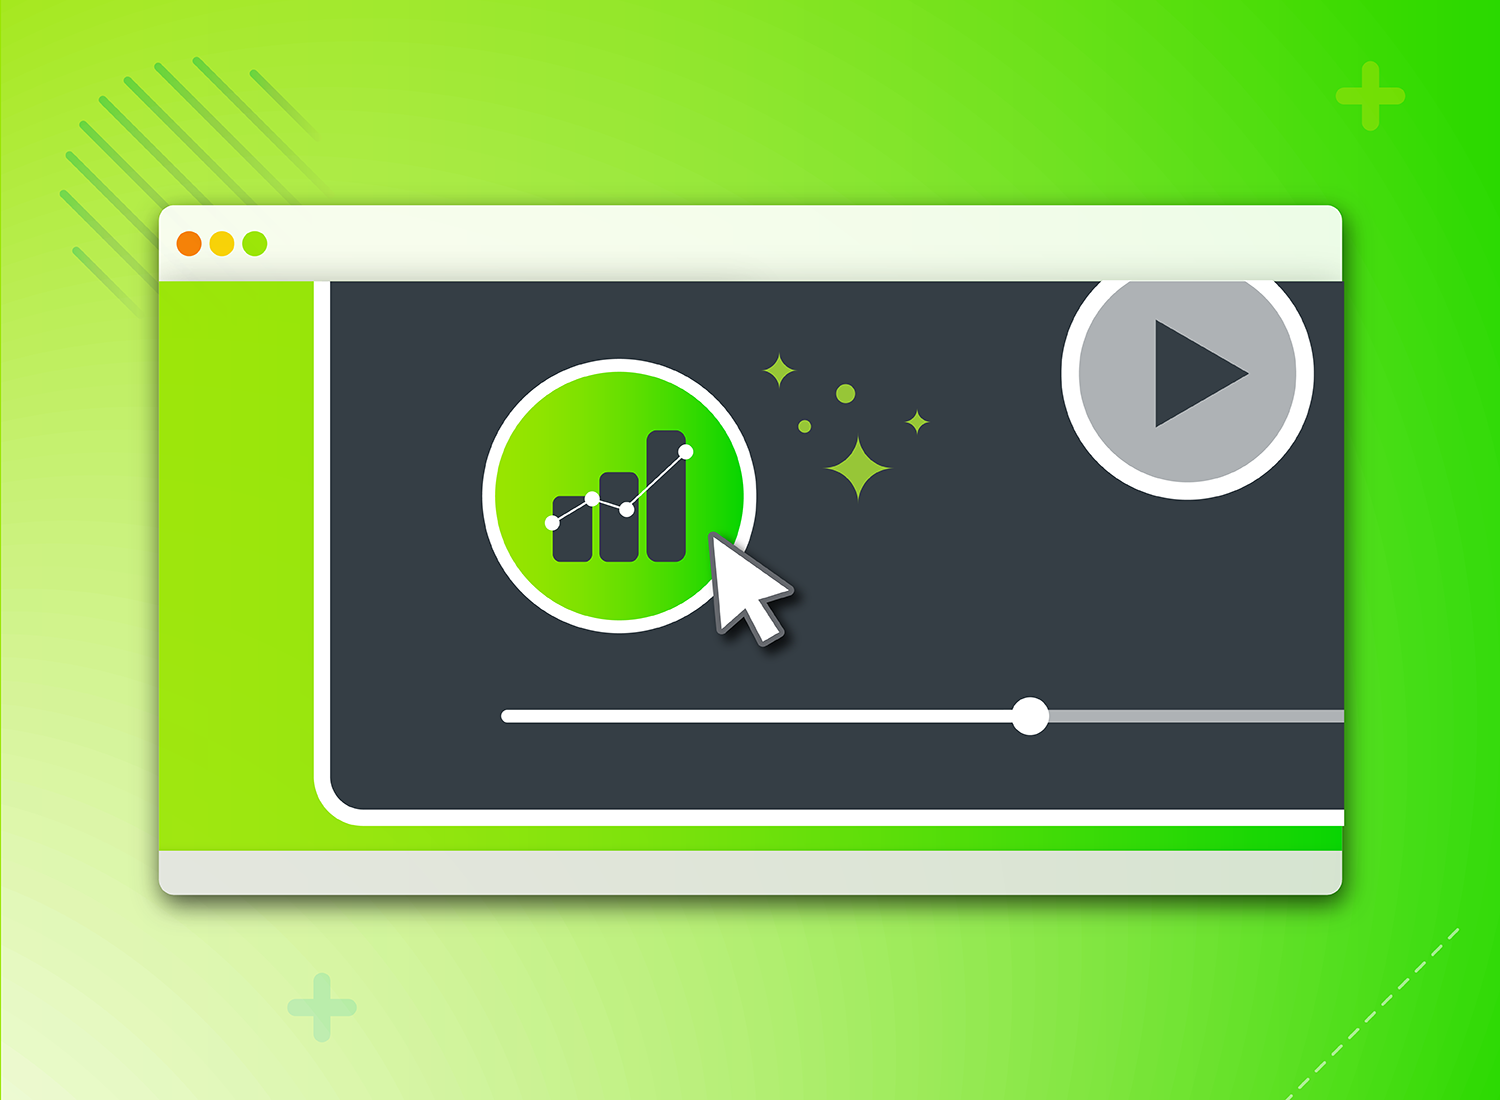 Illustration of a video player interface with a cursor pointing to an analytics icon, symbolizing the optimization of conversion rates through video content. The player features a large play button and a progress bar, set against a bright green background with subtle design elements.